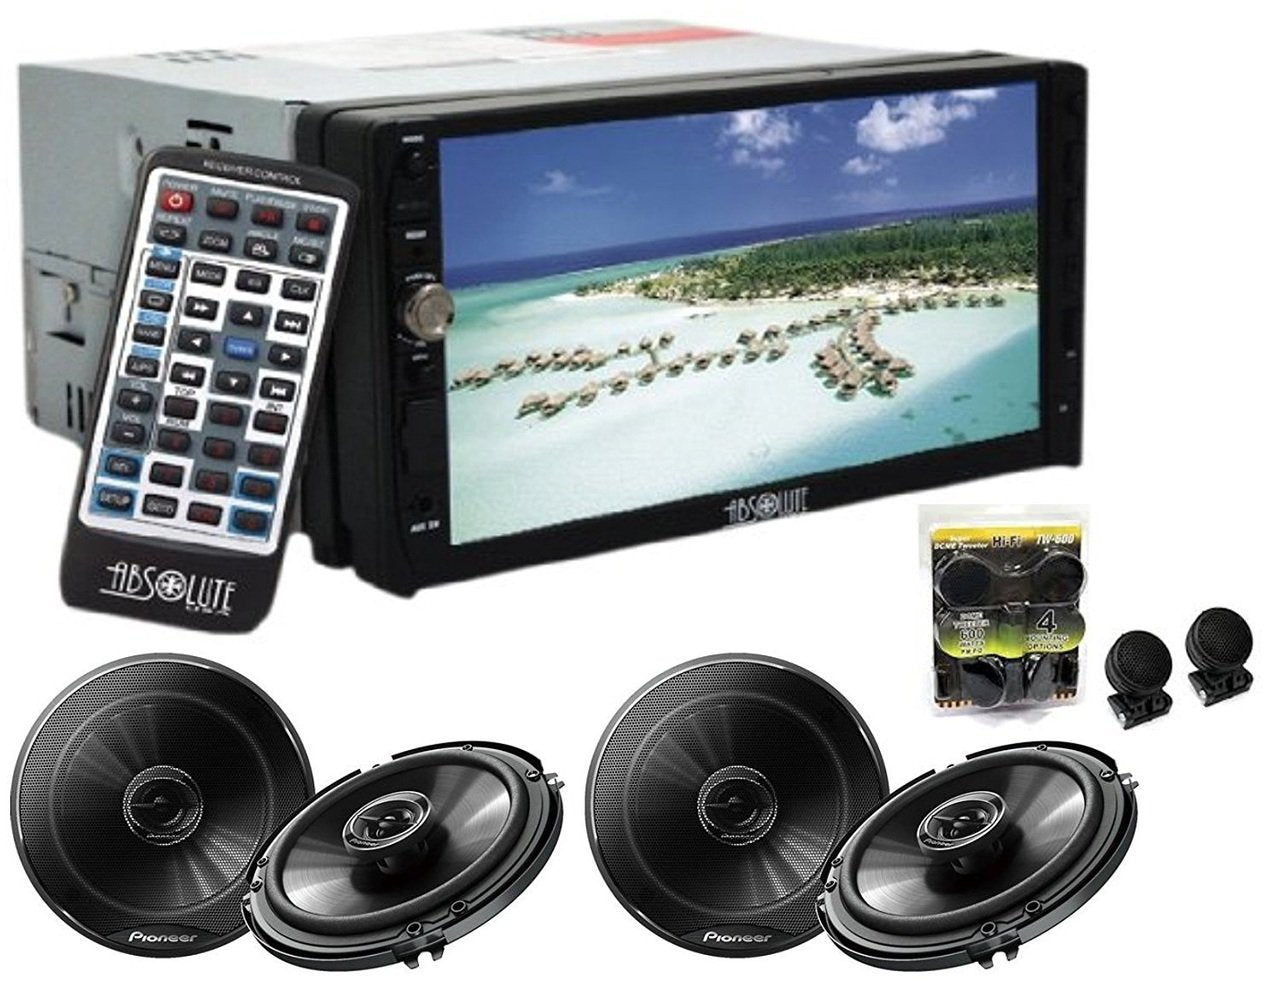 Absolute DD-3000ABT 7-Inch Double Din Multimedia DVD Player Receiver With 2 Pair Pioneer TS-G1645R 6.5 Speakers And Free Absolute TW600 Tweeter